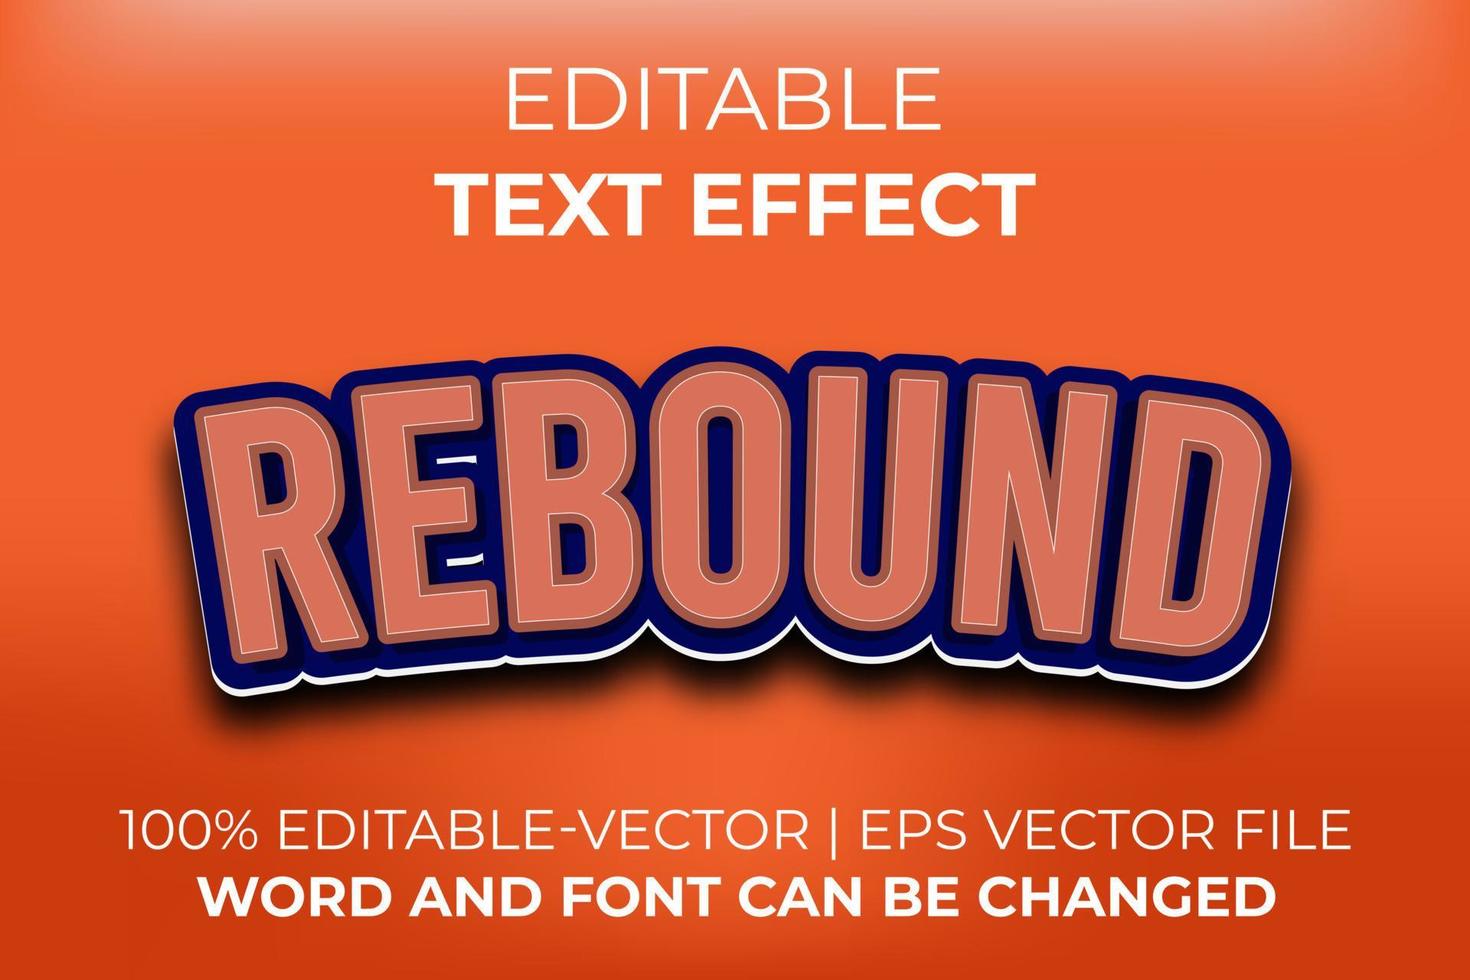 Rebound text effect, easy to edit vector